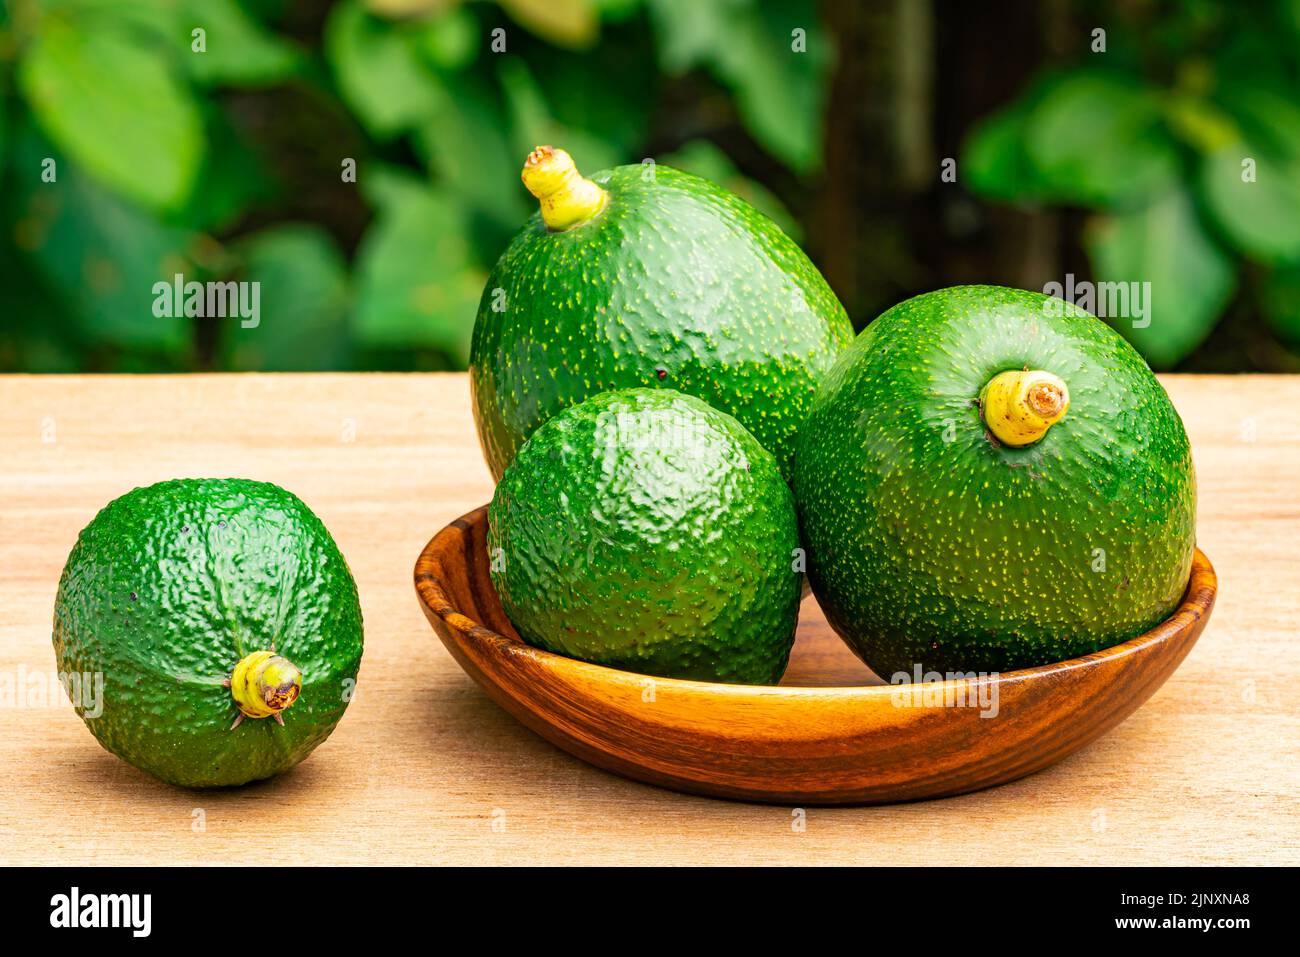 Closeup view group of fresh green avocadoes with stalk in wooden plate on wooden table. Stock Photo